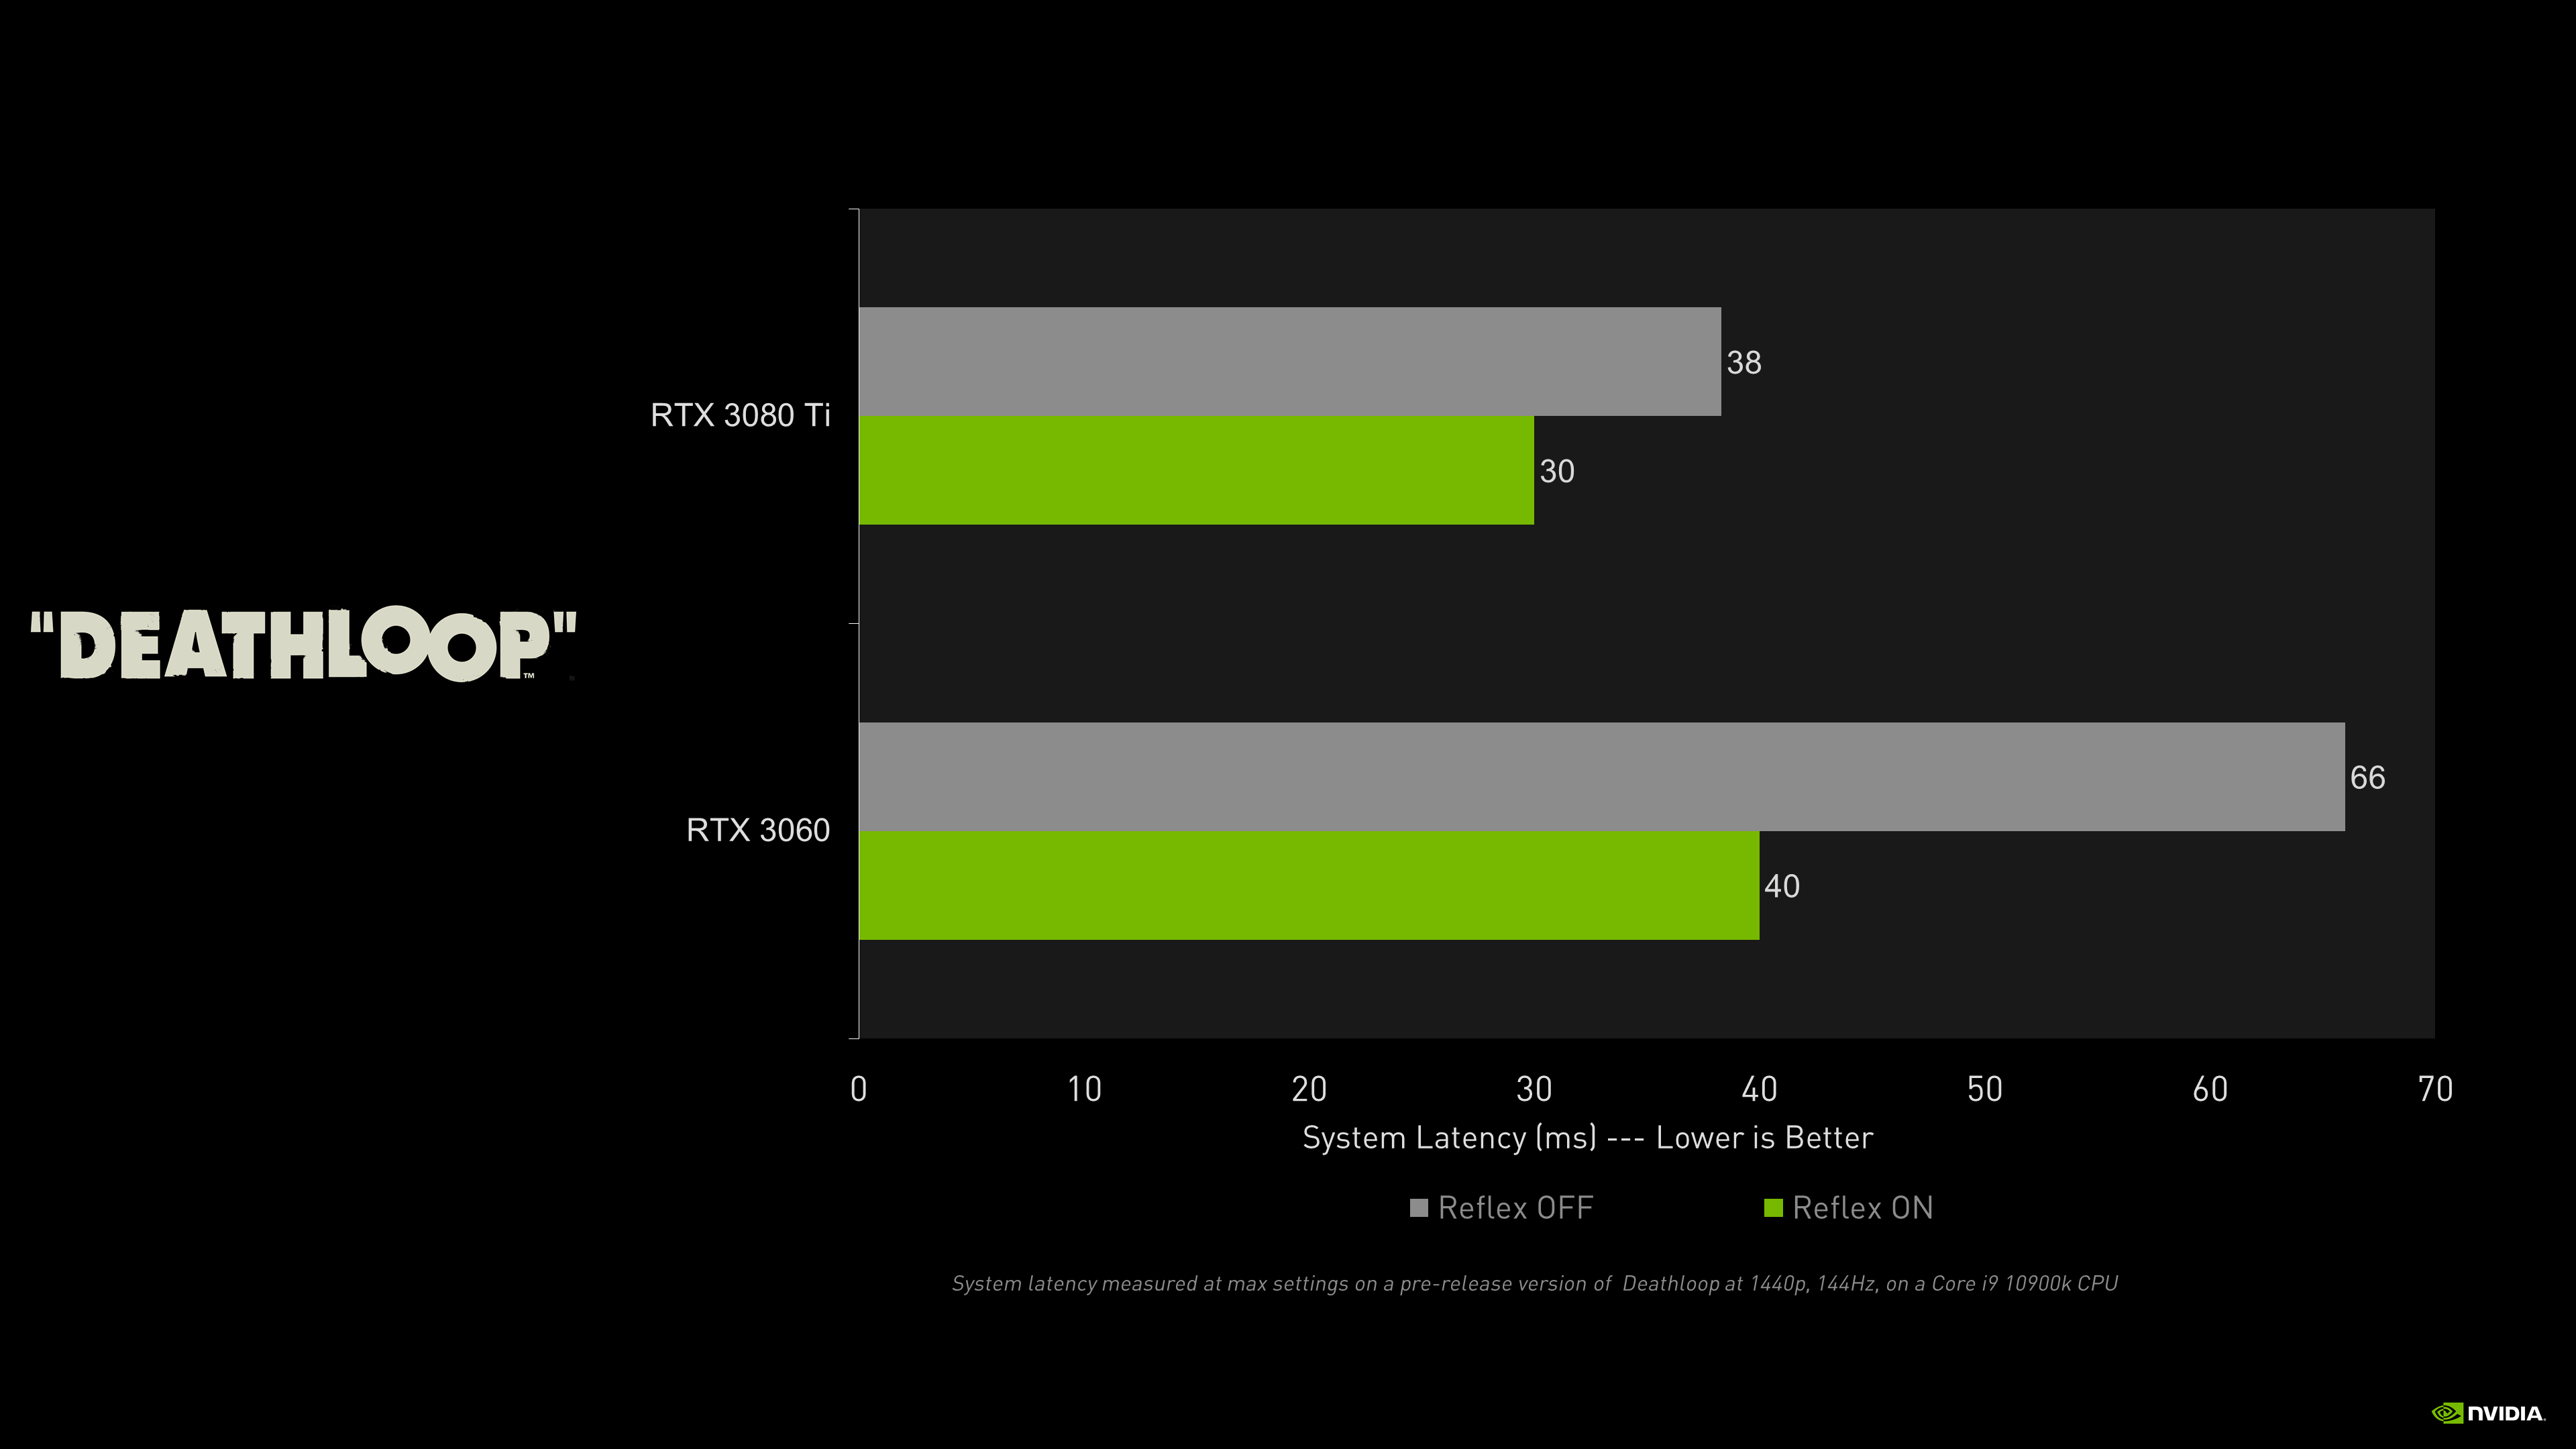 deathloop-nvidia-reflex-system-latency-performance-chart.png.PNG